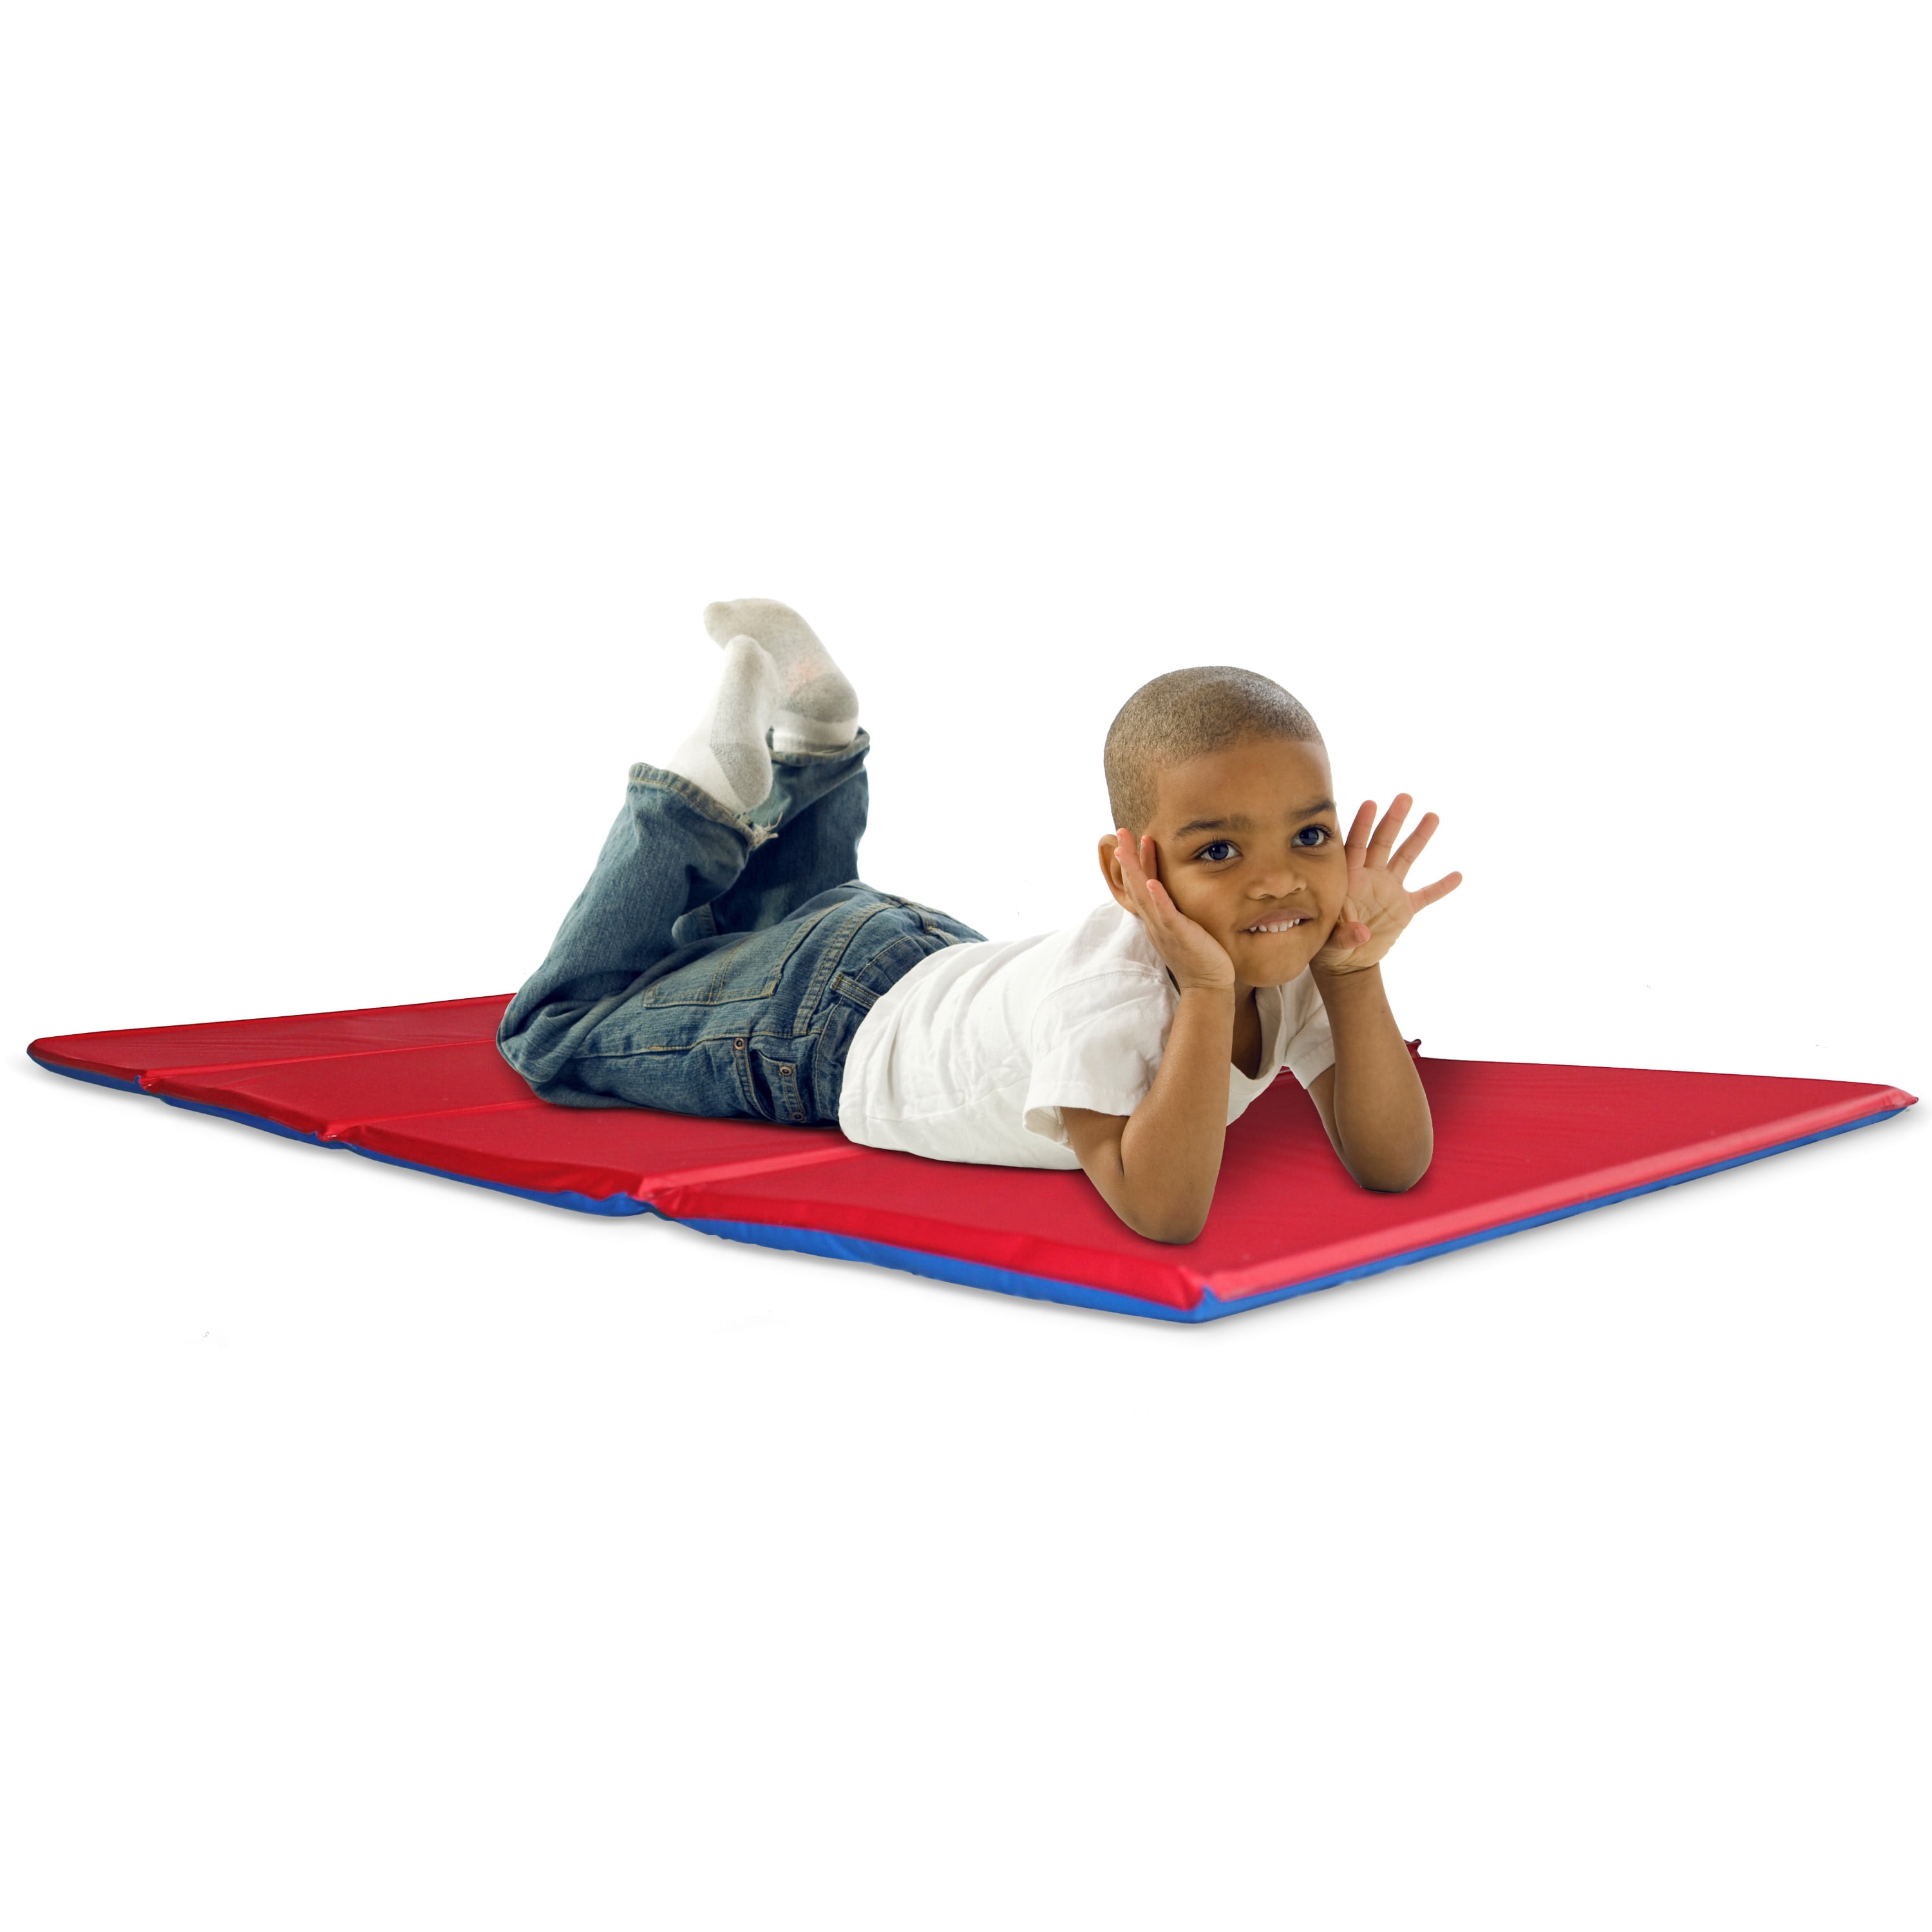 Size 1 inch x 19 x 45 Inches KinderMat Tri-Fold 2 Color Design Red/Blue 